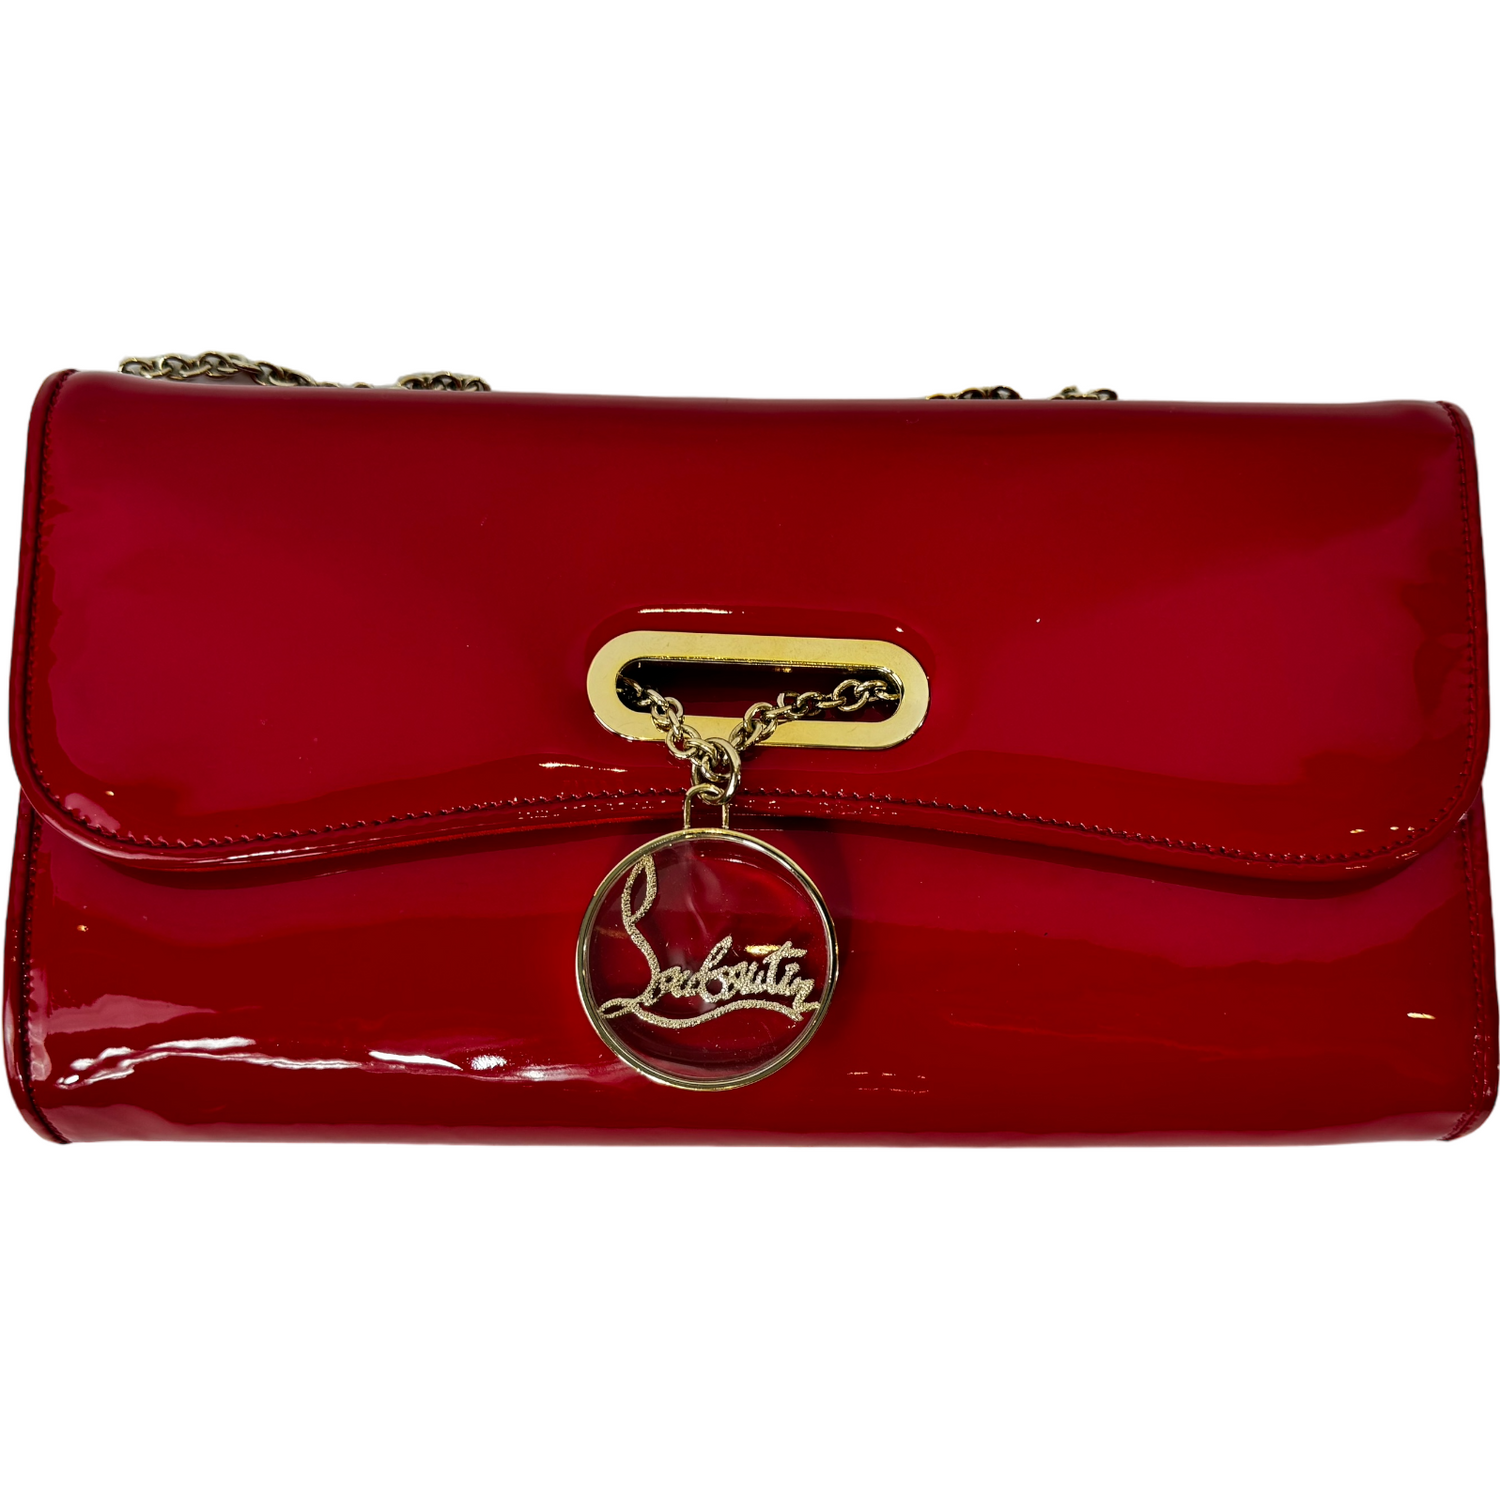 CHRISTIAN LOUBOUTIN Red Patent Riviera Clutch Bag